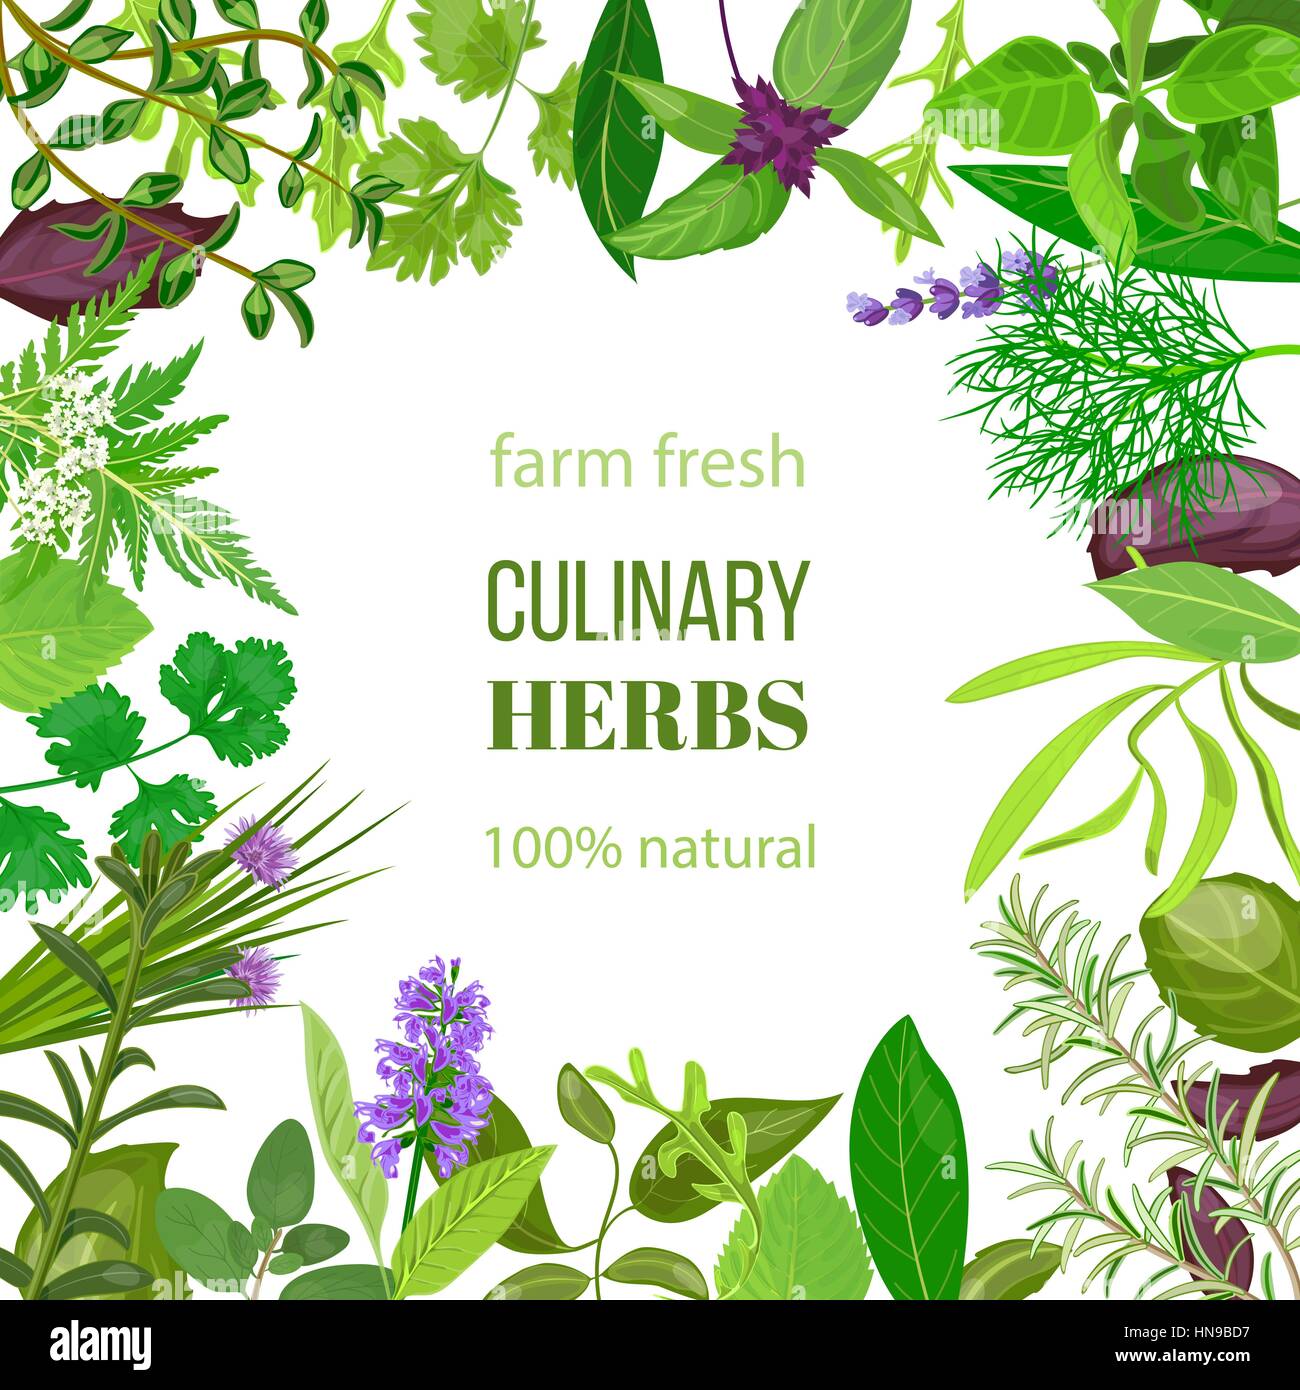 Culinary herbs ornament with text 100 natural. Vector illustration. Food design for market, menu, health care products, spa salon, ready logo, icon Stock Vector